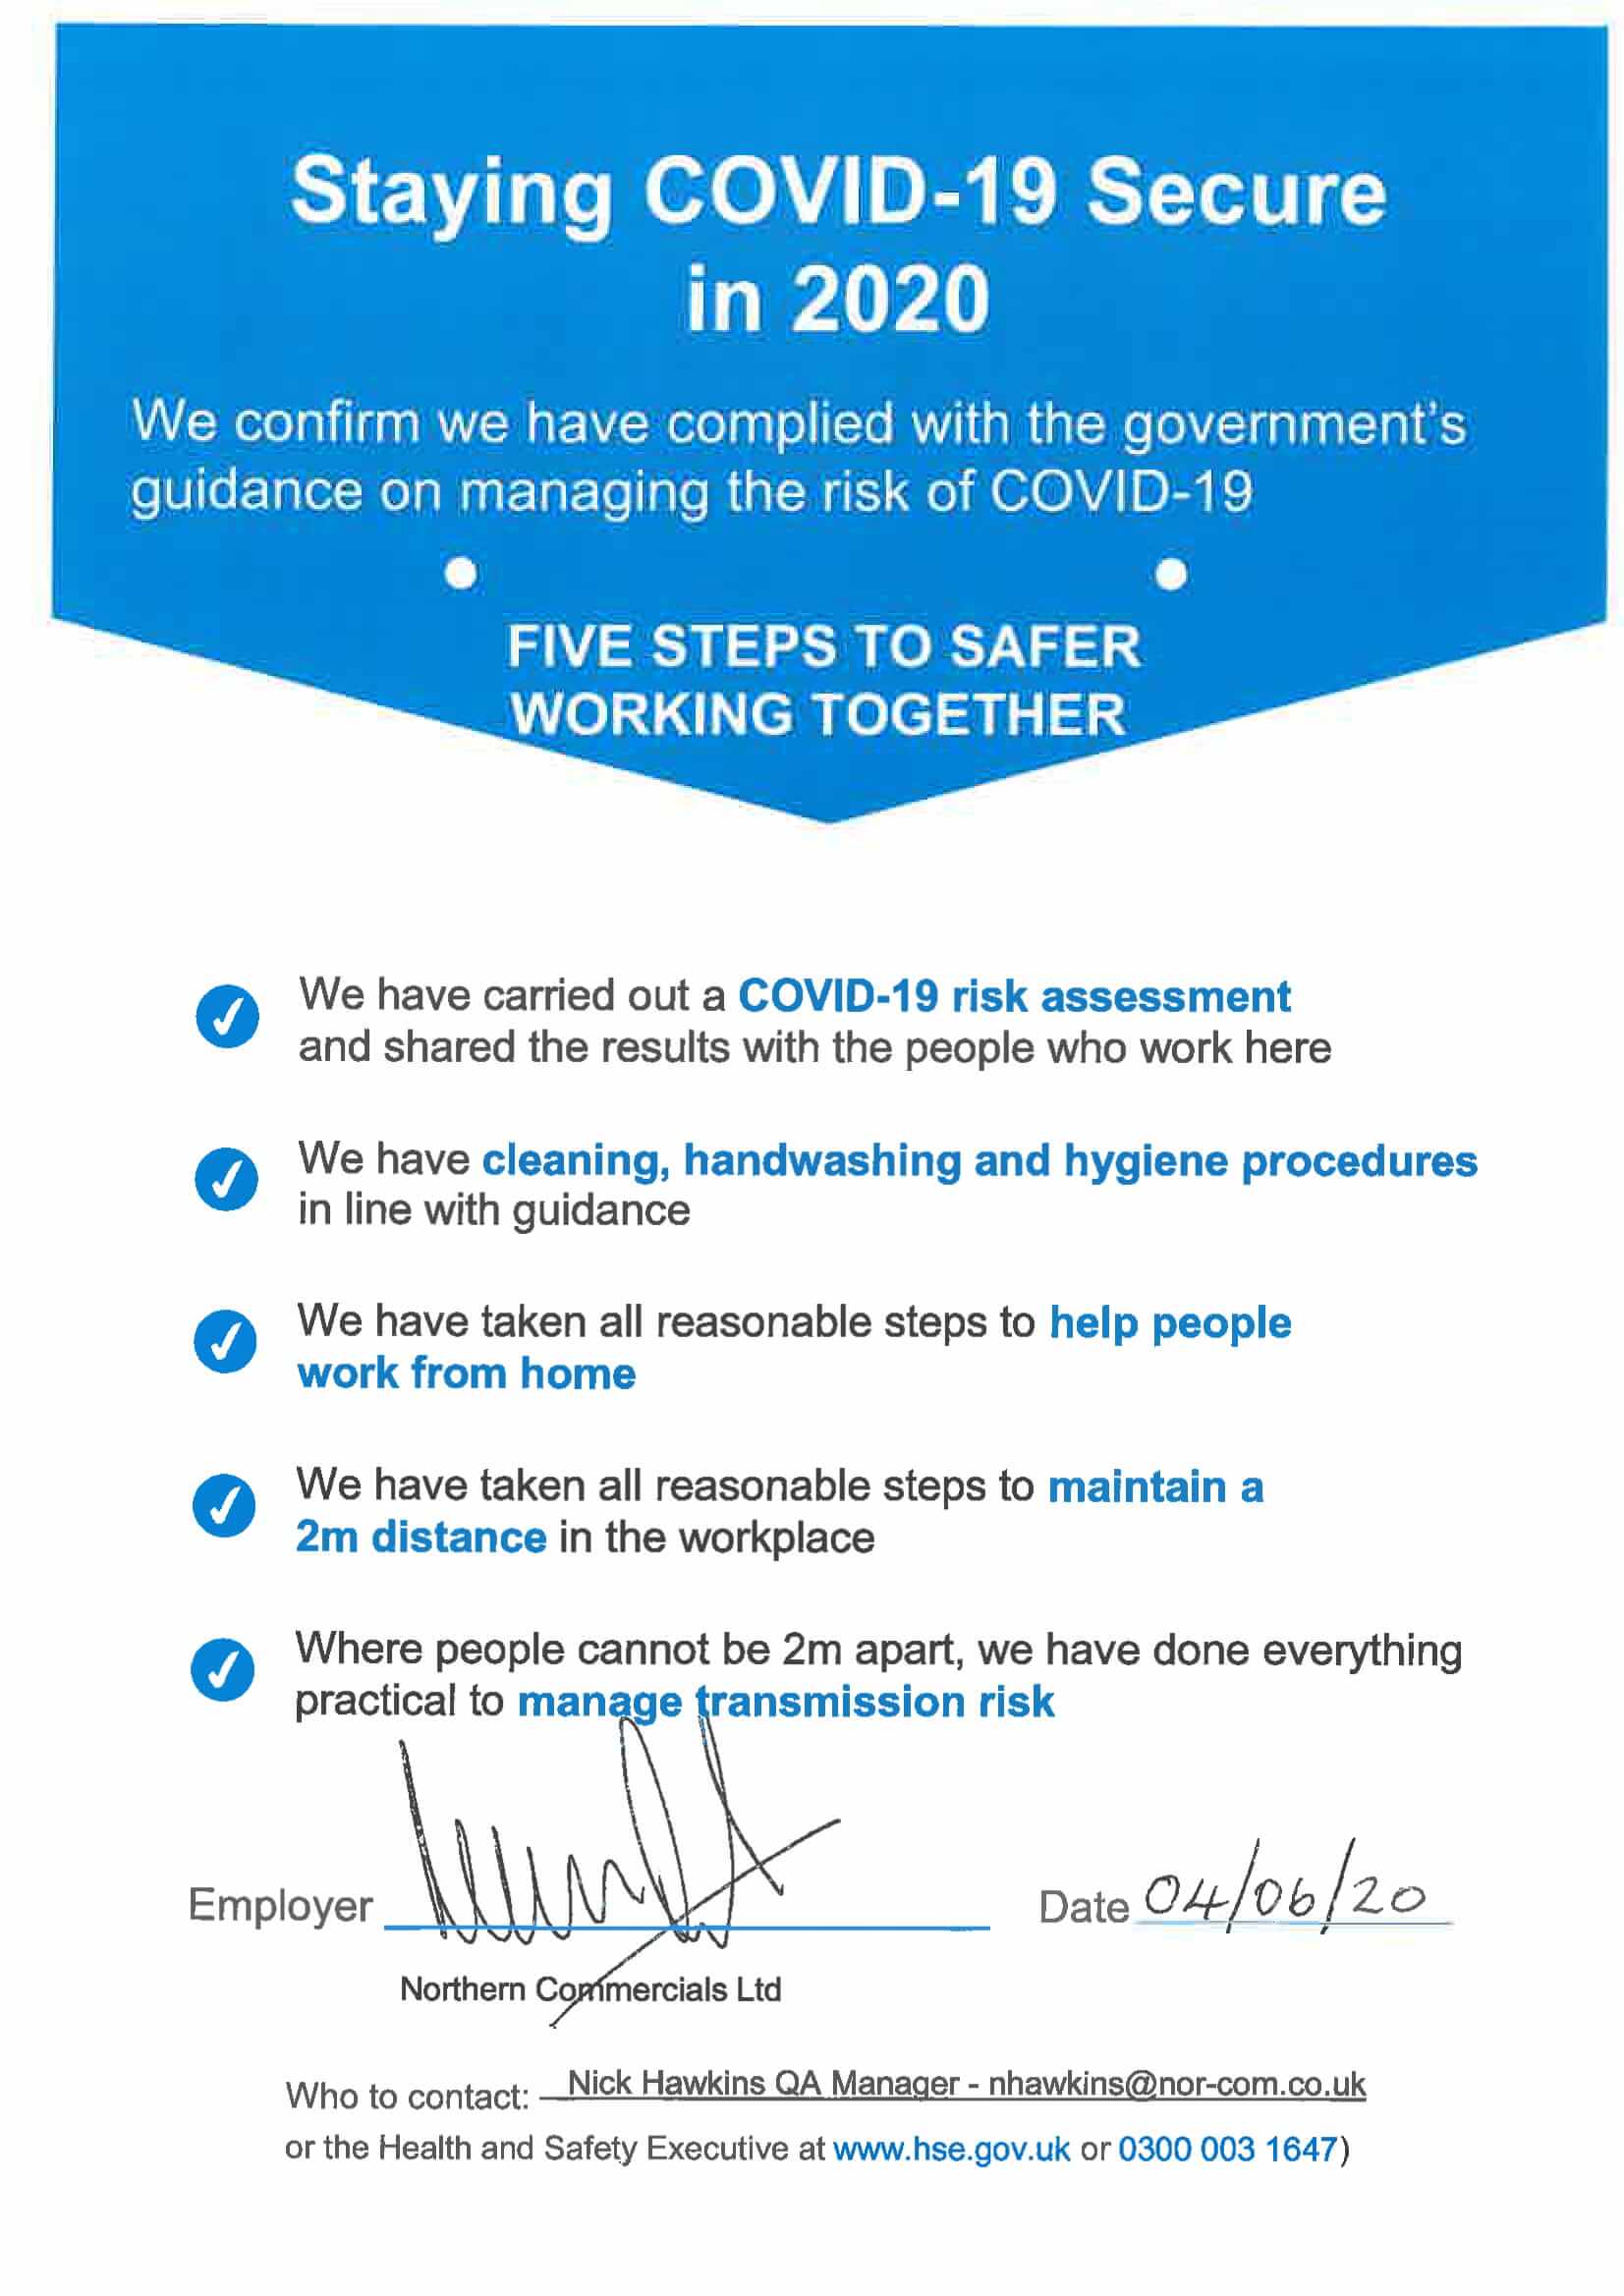 Staying COVID-19 secure in 2020